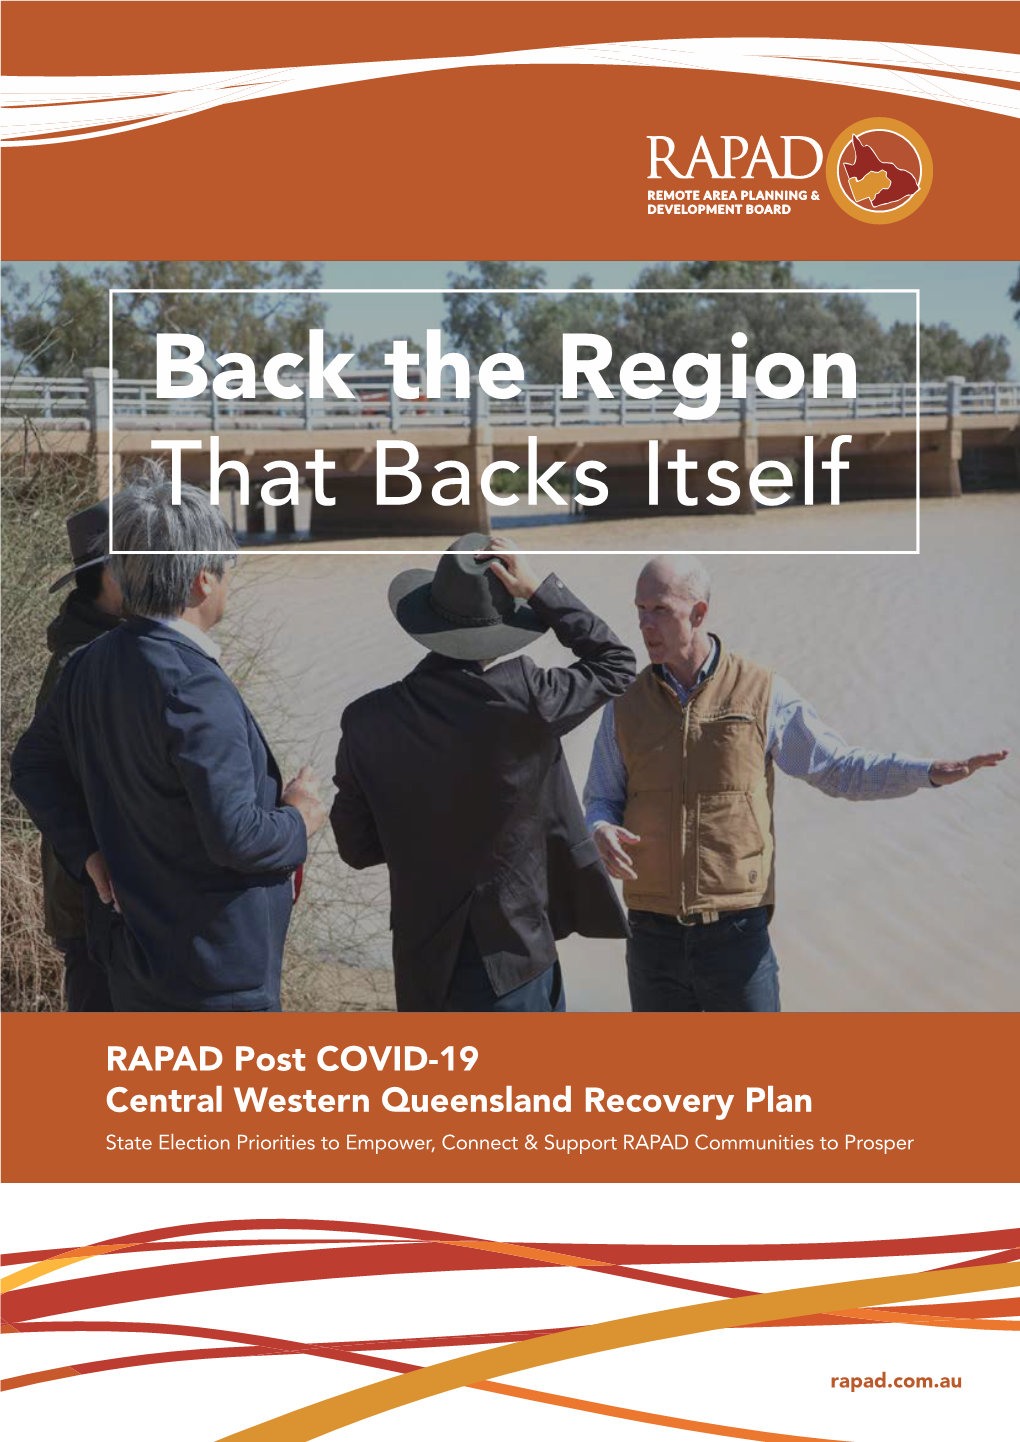 RAPAD Post COVID-19 Central Western Queensland Recovery Plan State Election Priorities to Empower, Connect & Support RAPAD Communities to Prosper